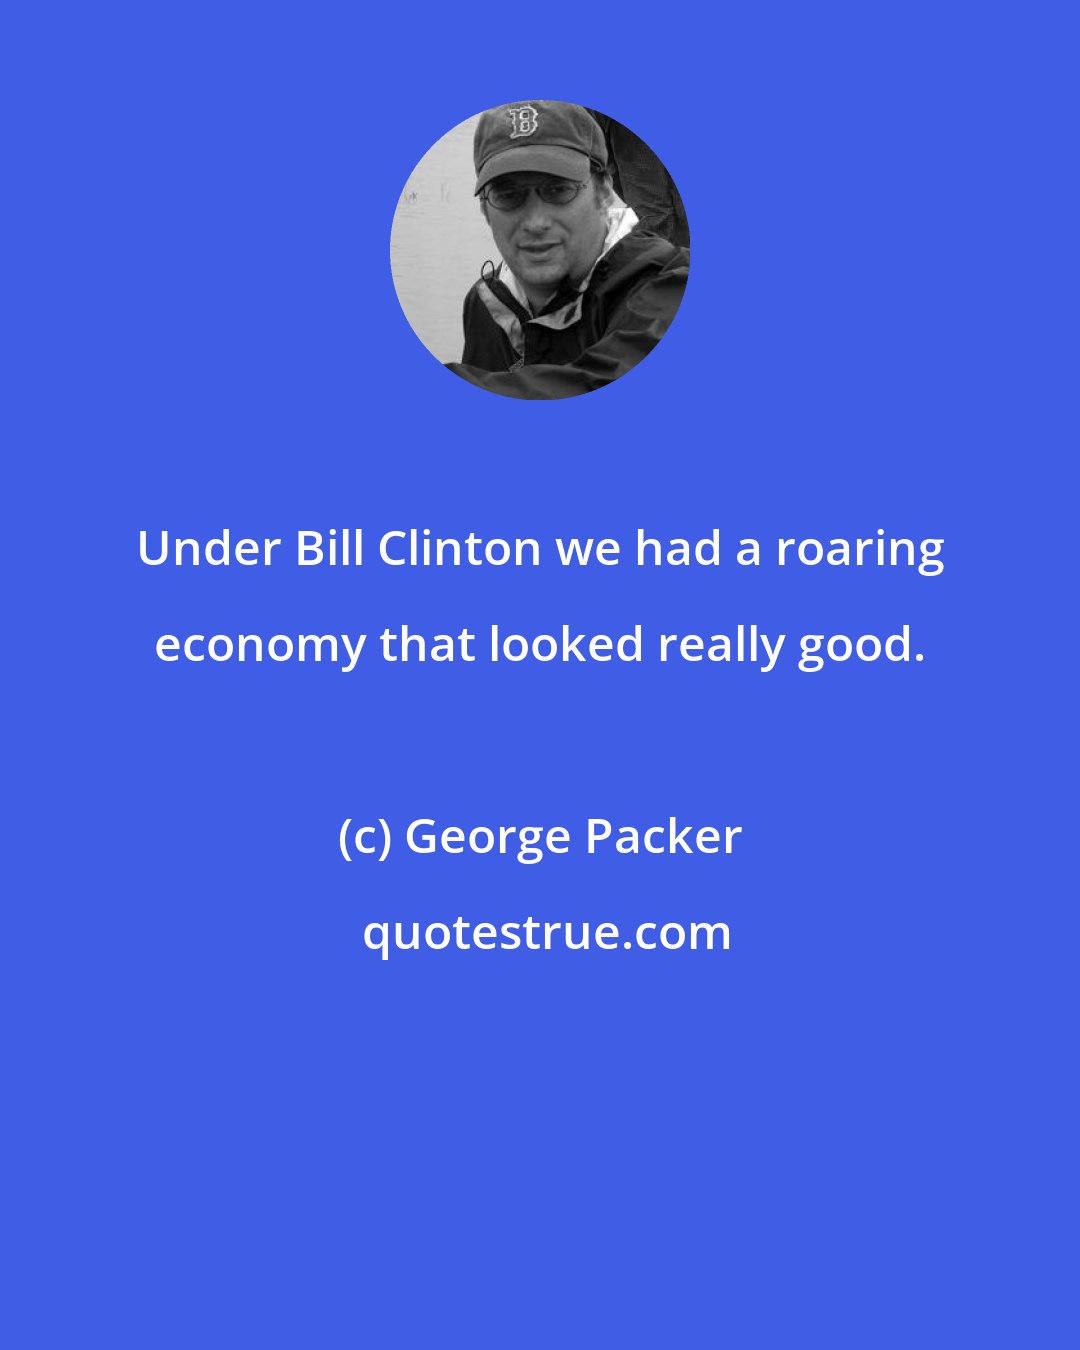 George Packer: Under Bill Clinton we had a roaring economy that looked really good.